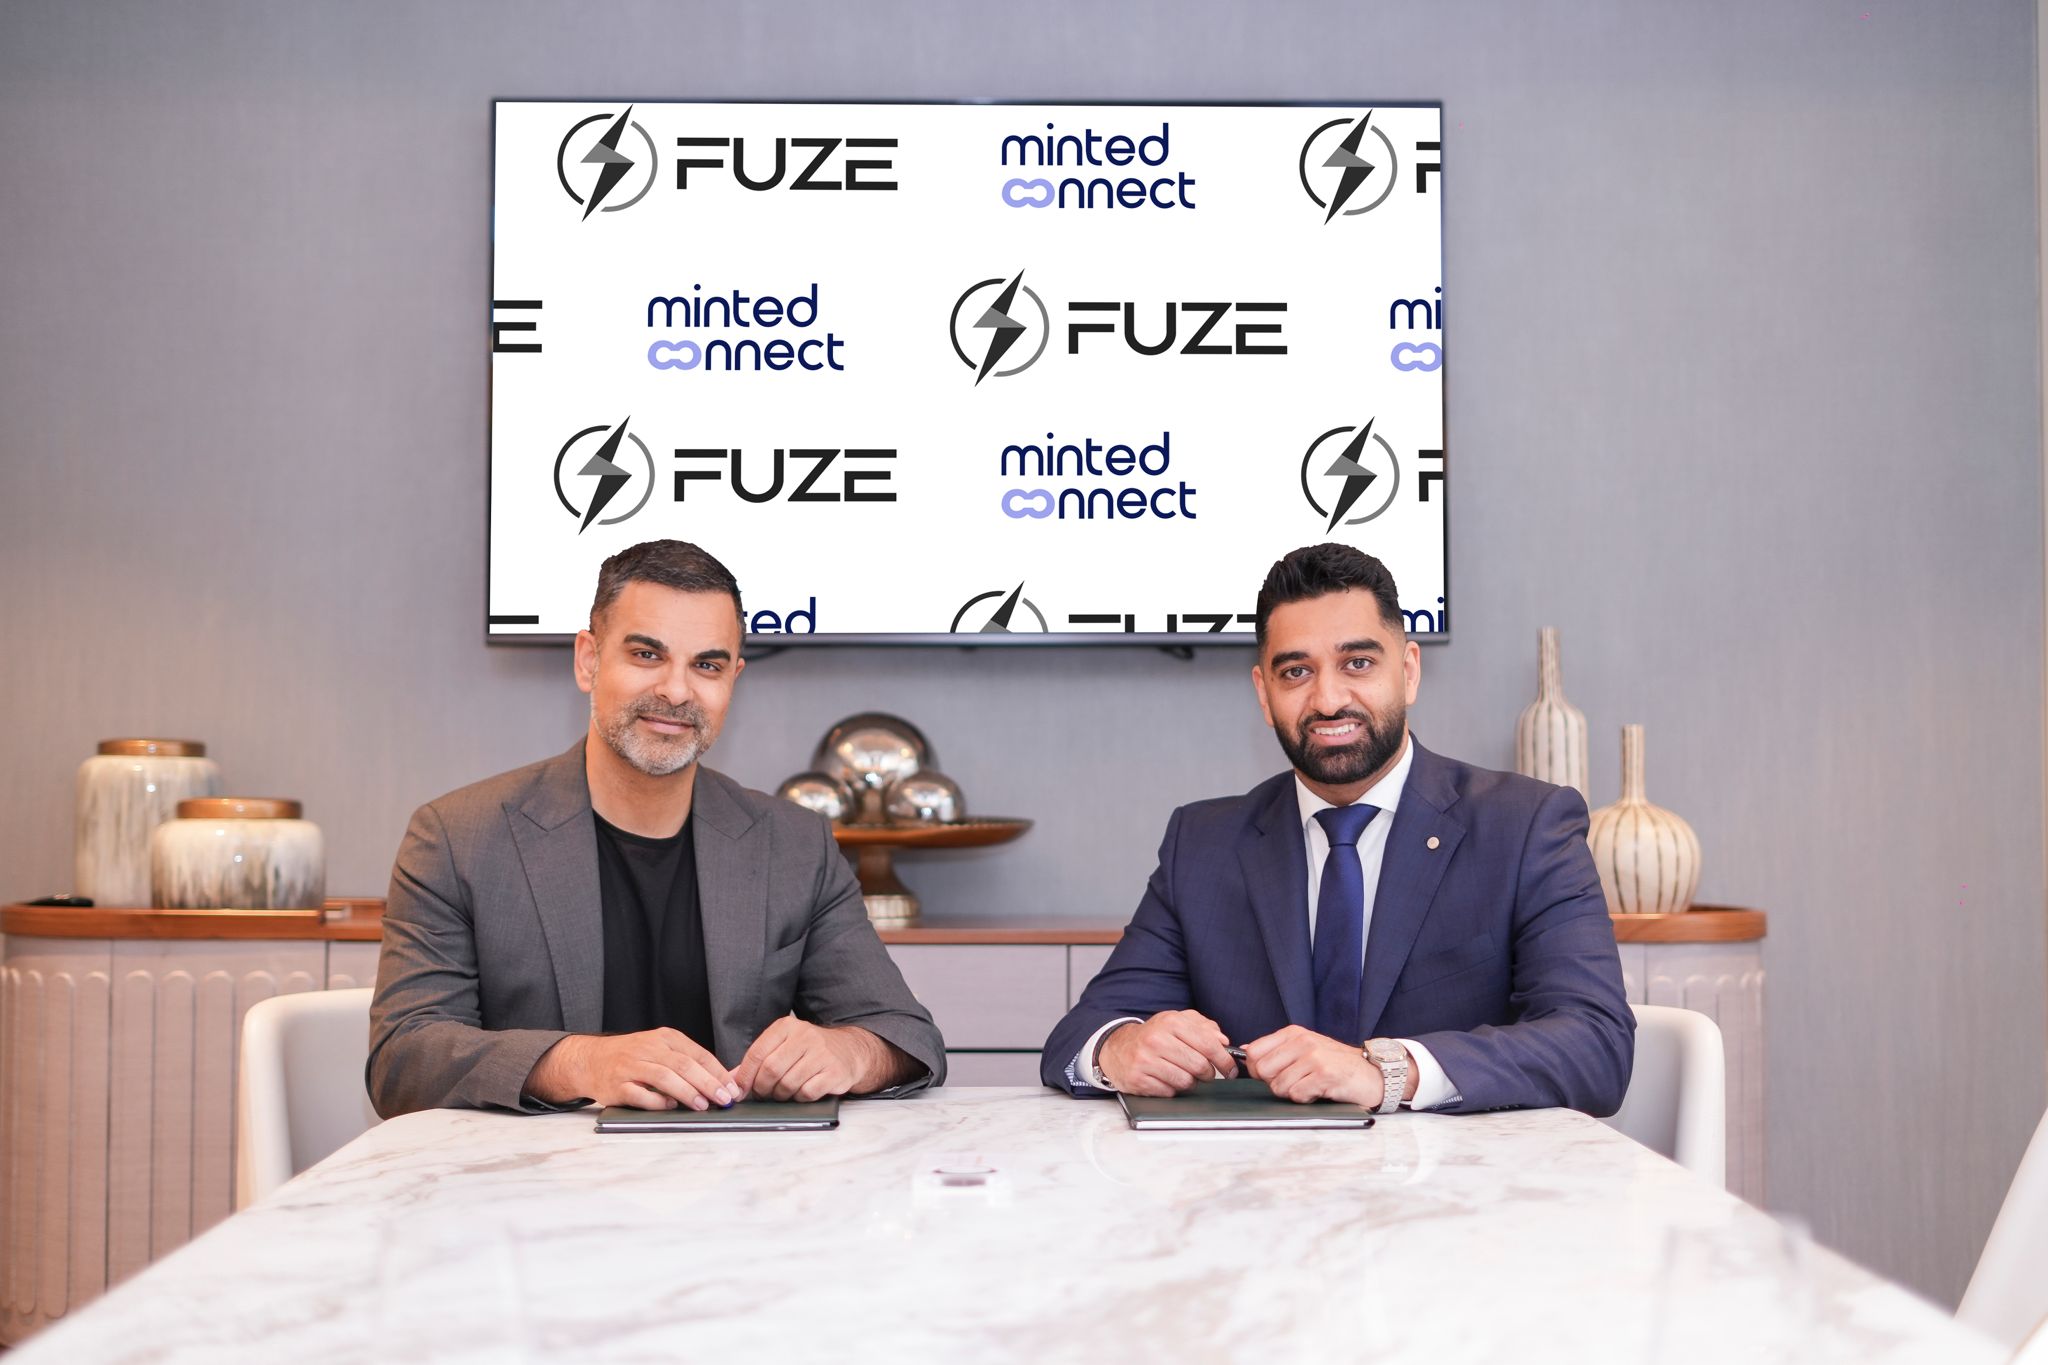 Minted Connect and Fuze Sign Partnership to Explore Tokenization of Precious Metals!